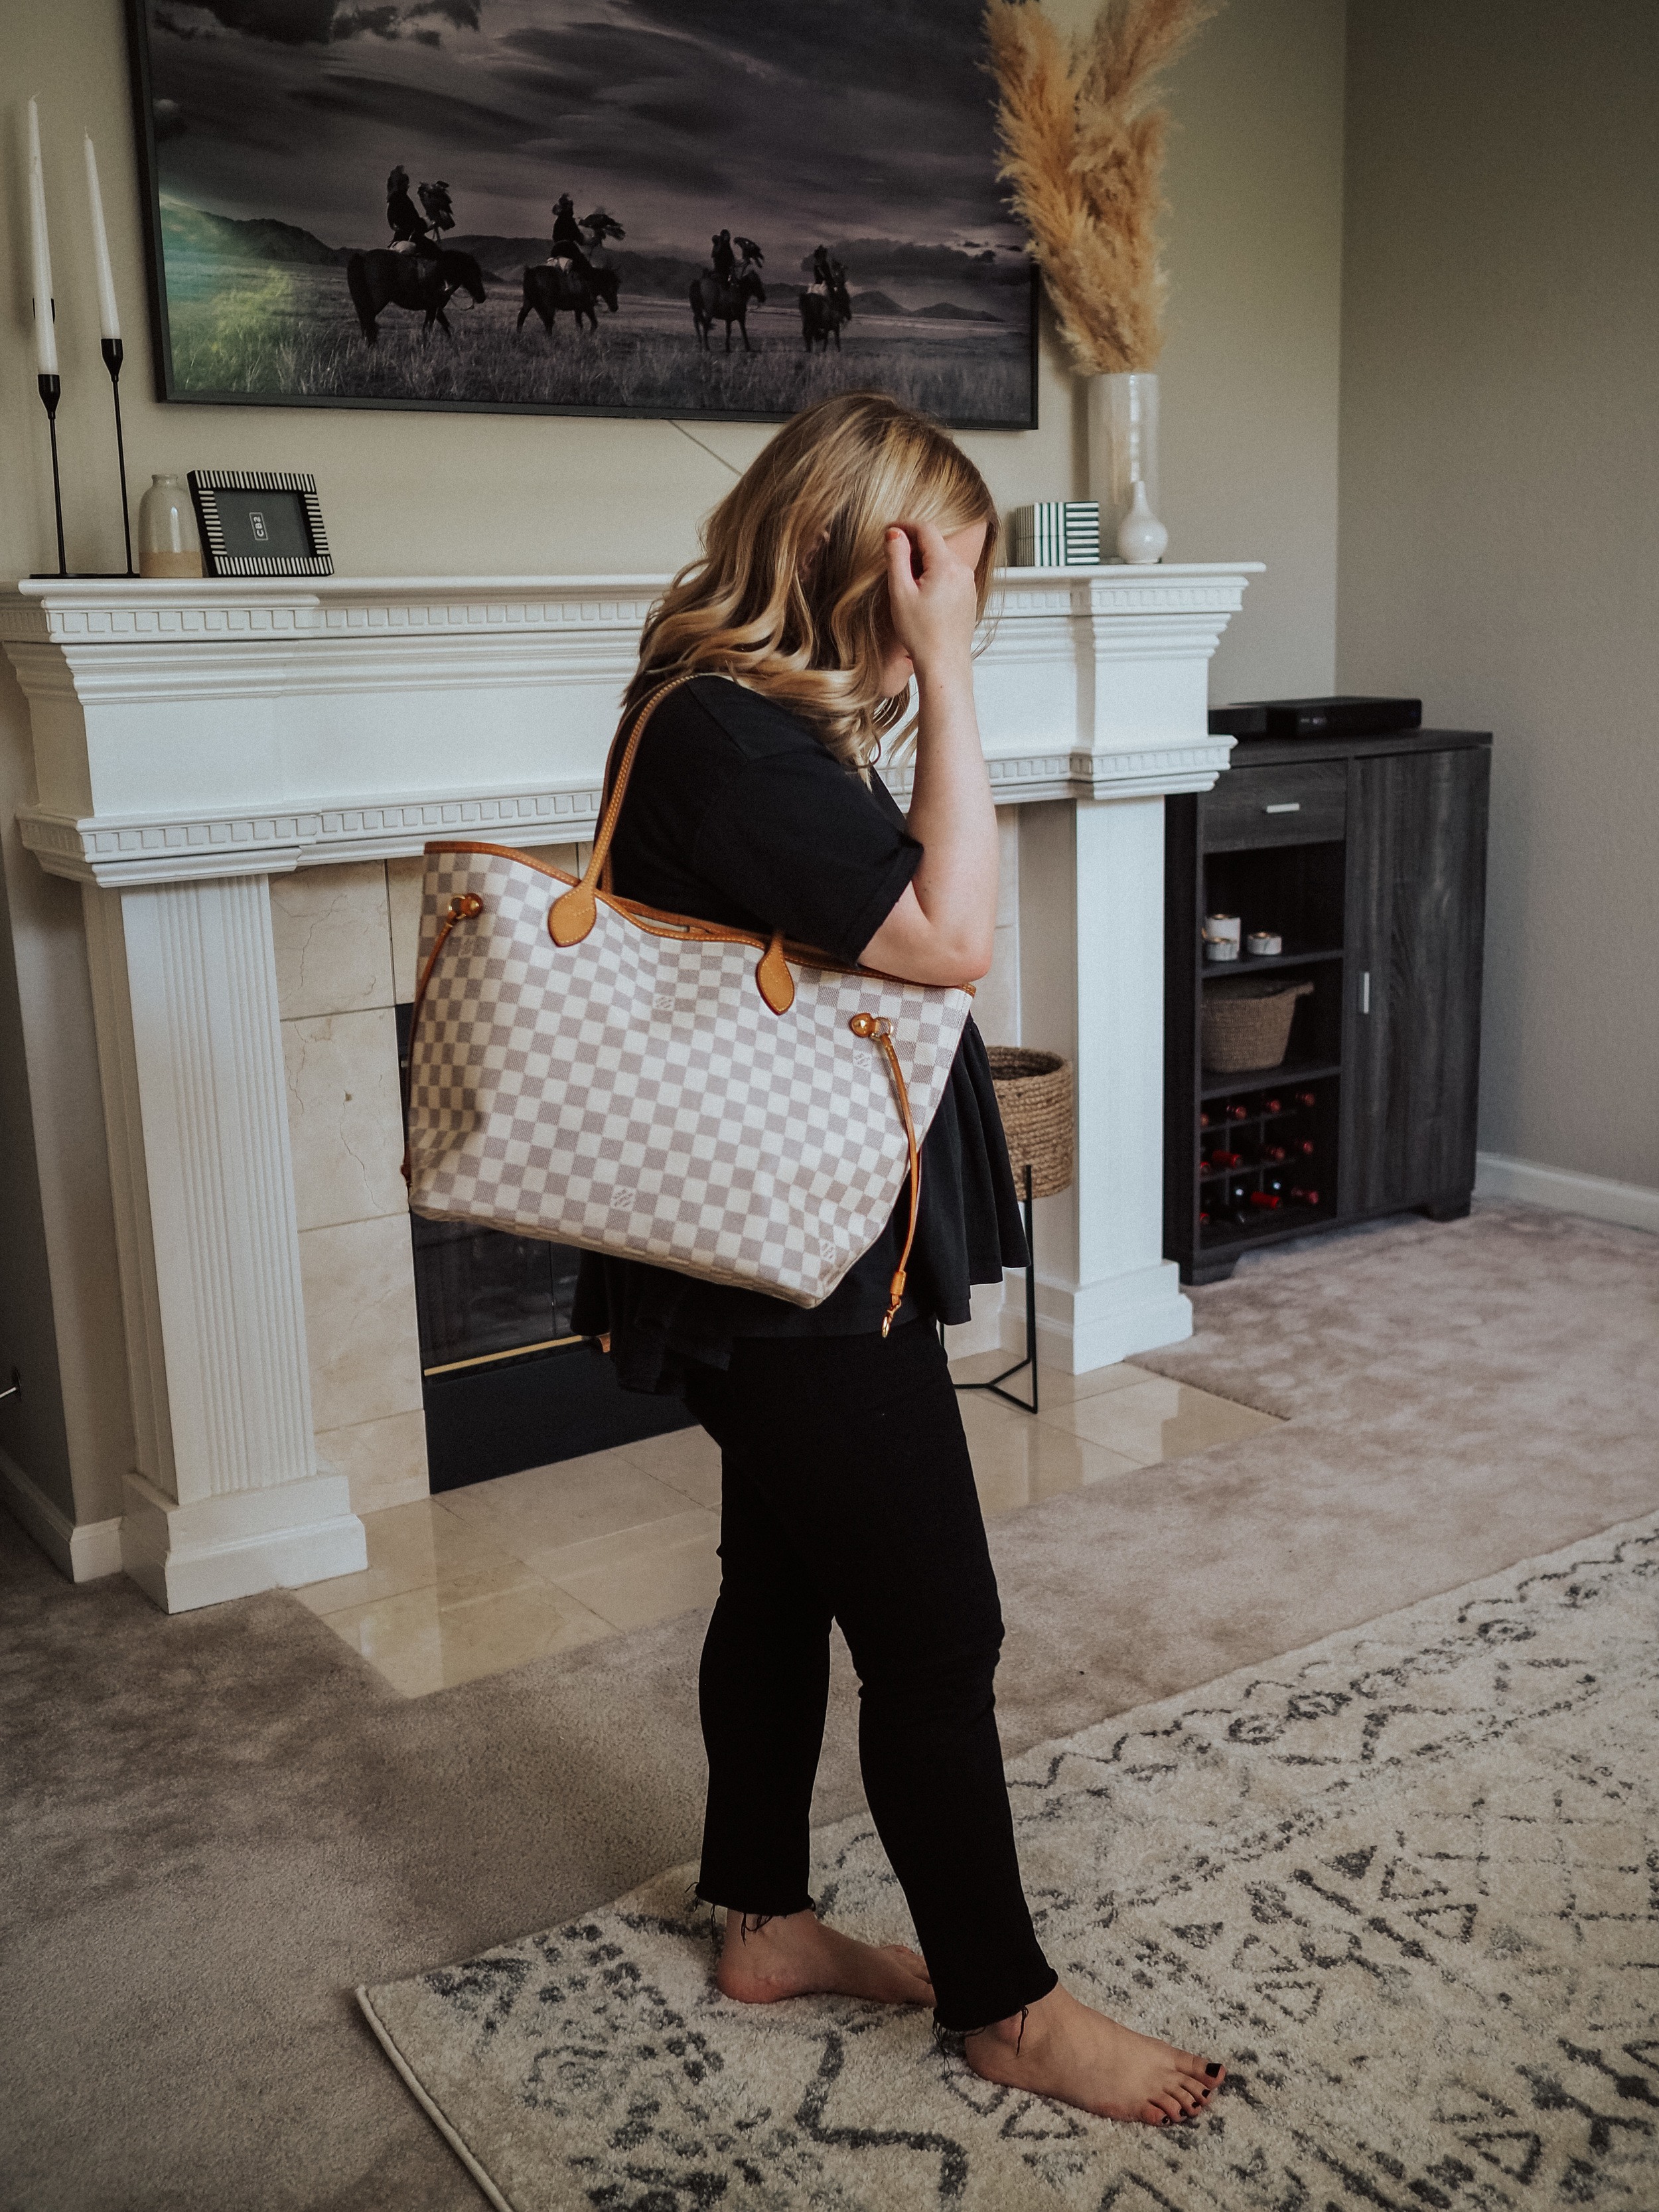 compared lv neverfull sizes